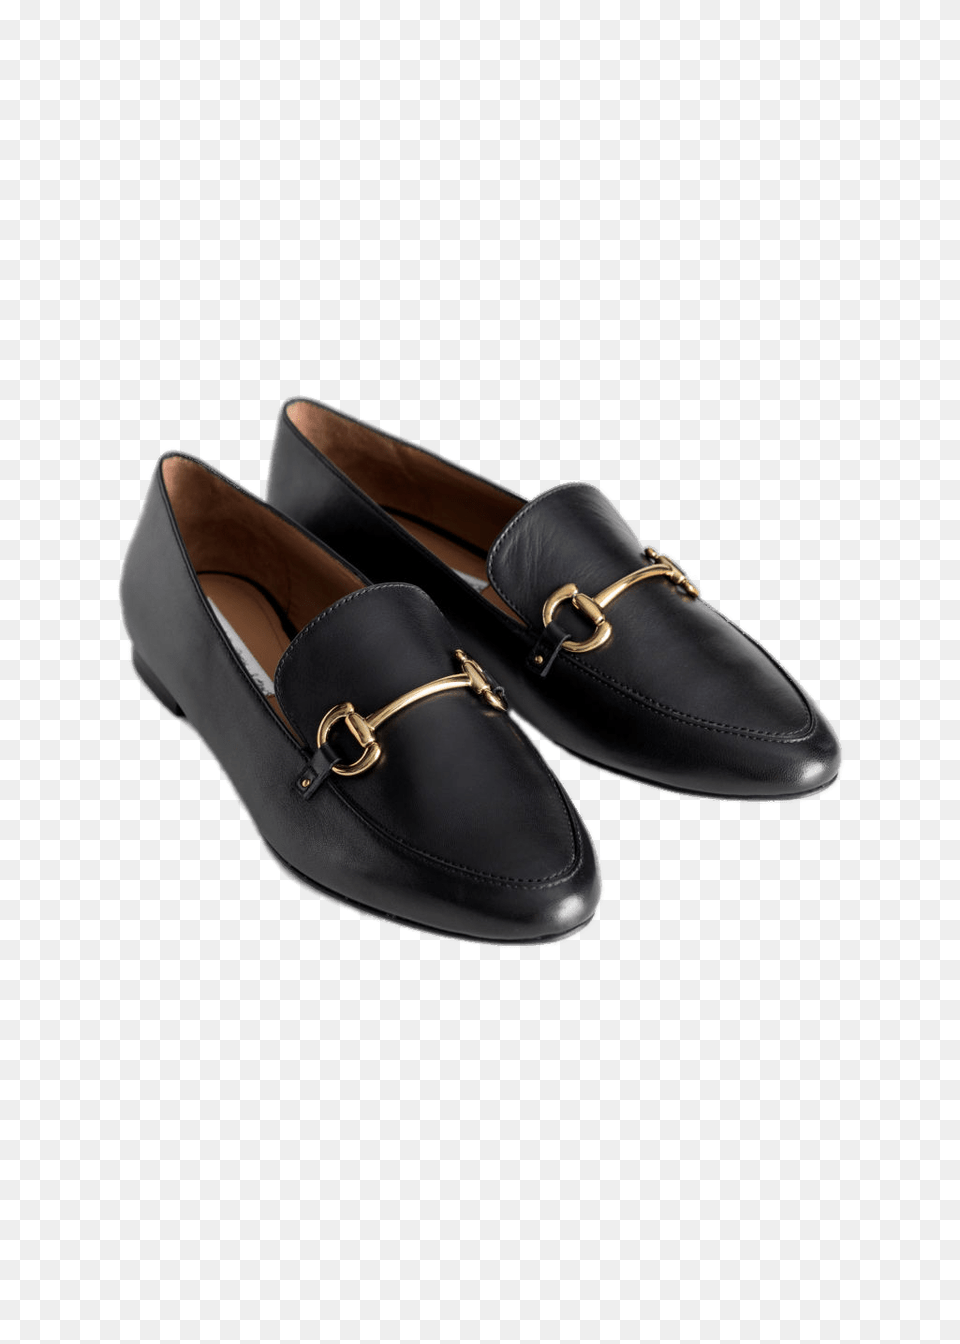 Equestrian Buckle Loafers, Clothing, Footwear, Shoe, Sandal Png Image